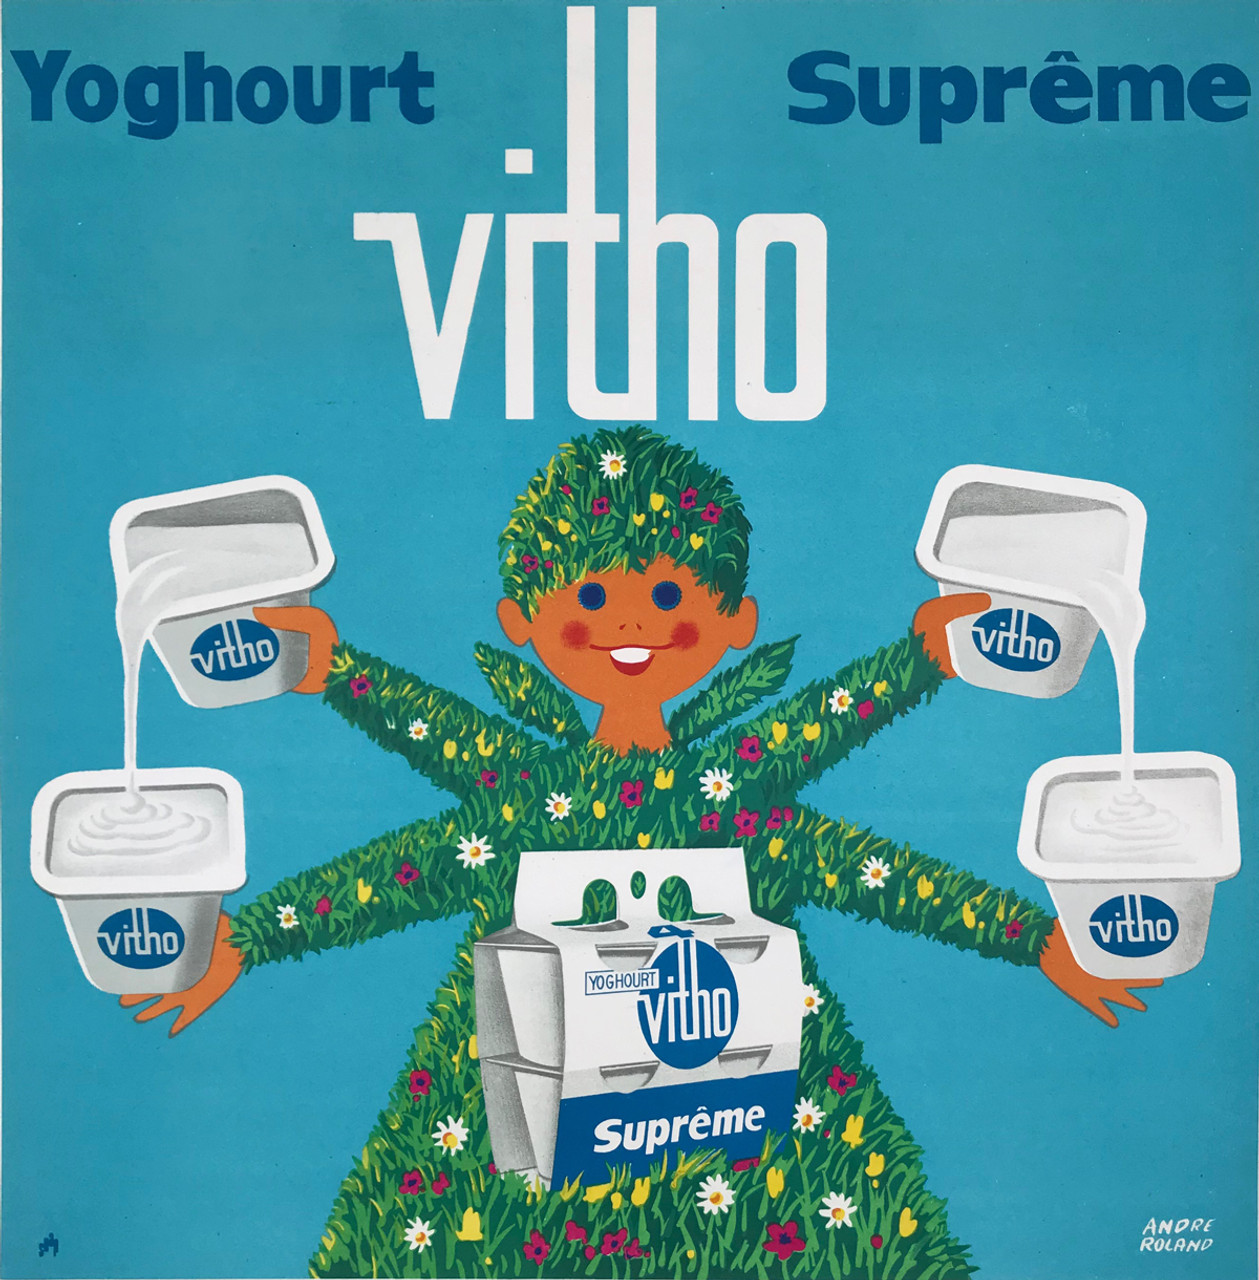 Vitho Supreme Yoghourt by Andre Roland Original 1959 Vintage French Yogurt Advertisement Lithograph Poster Linen Backed.